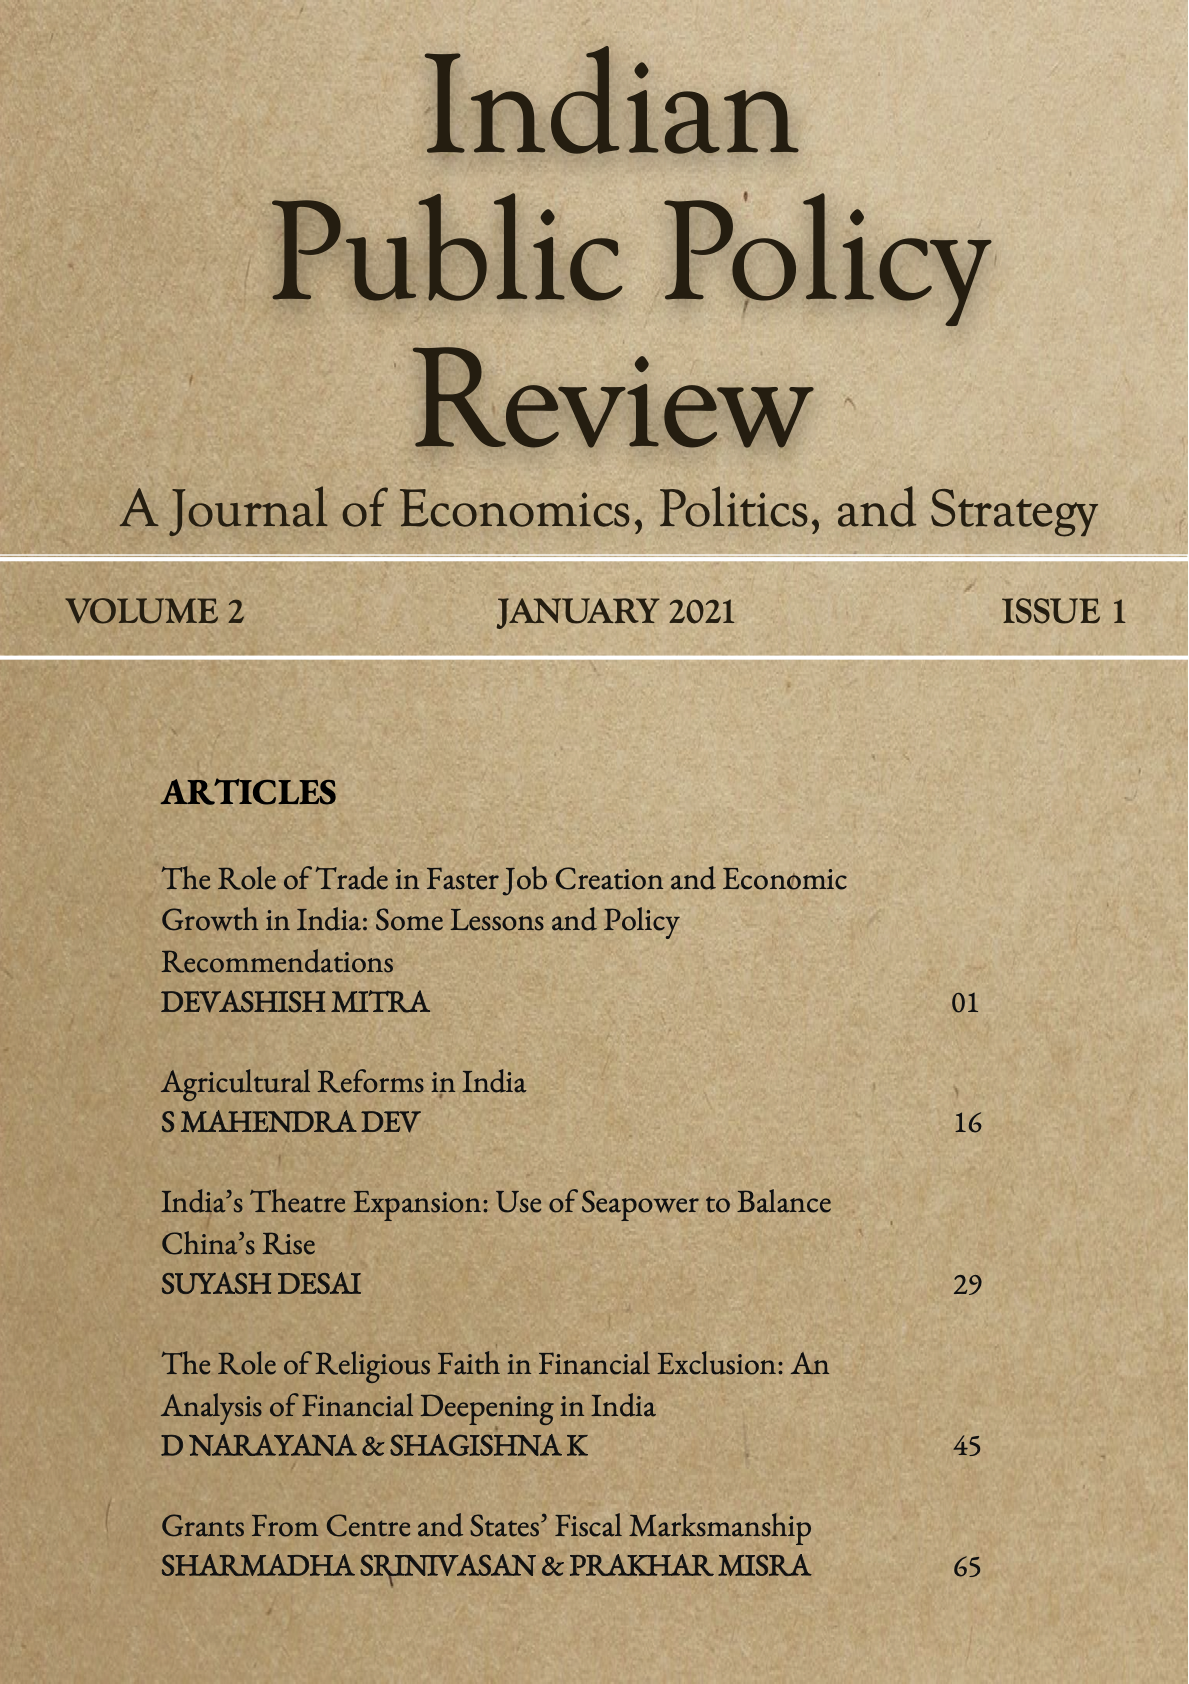 					View Vol. 2 No. 1(Jan-Feb) (2021): Indian Public Policy Review
				